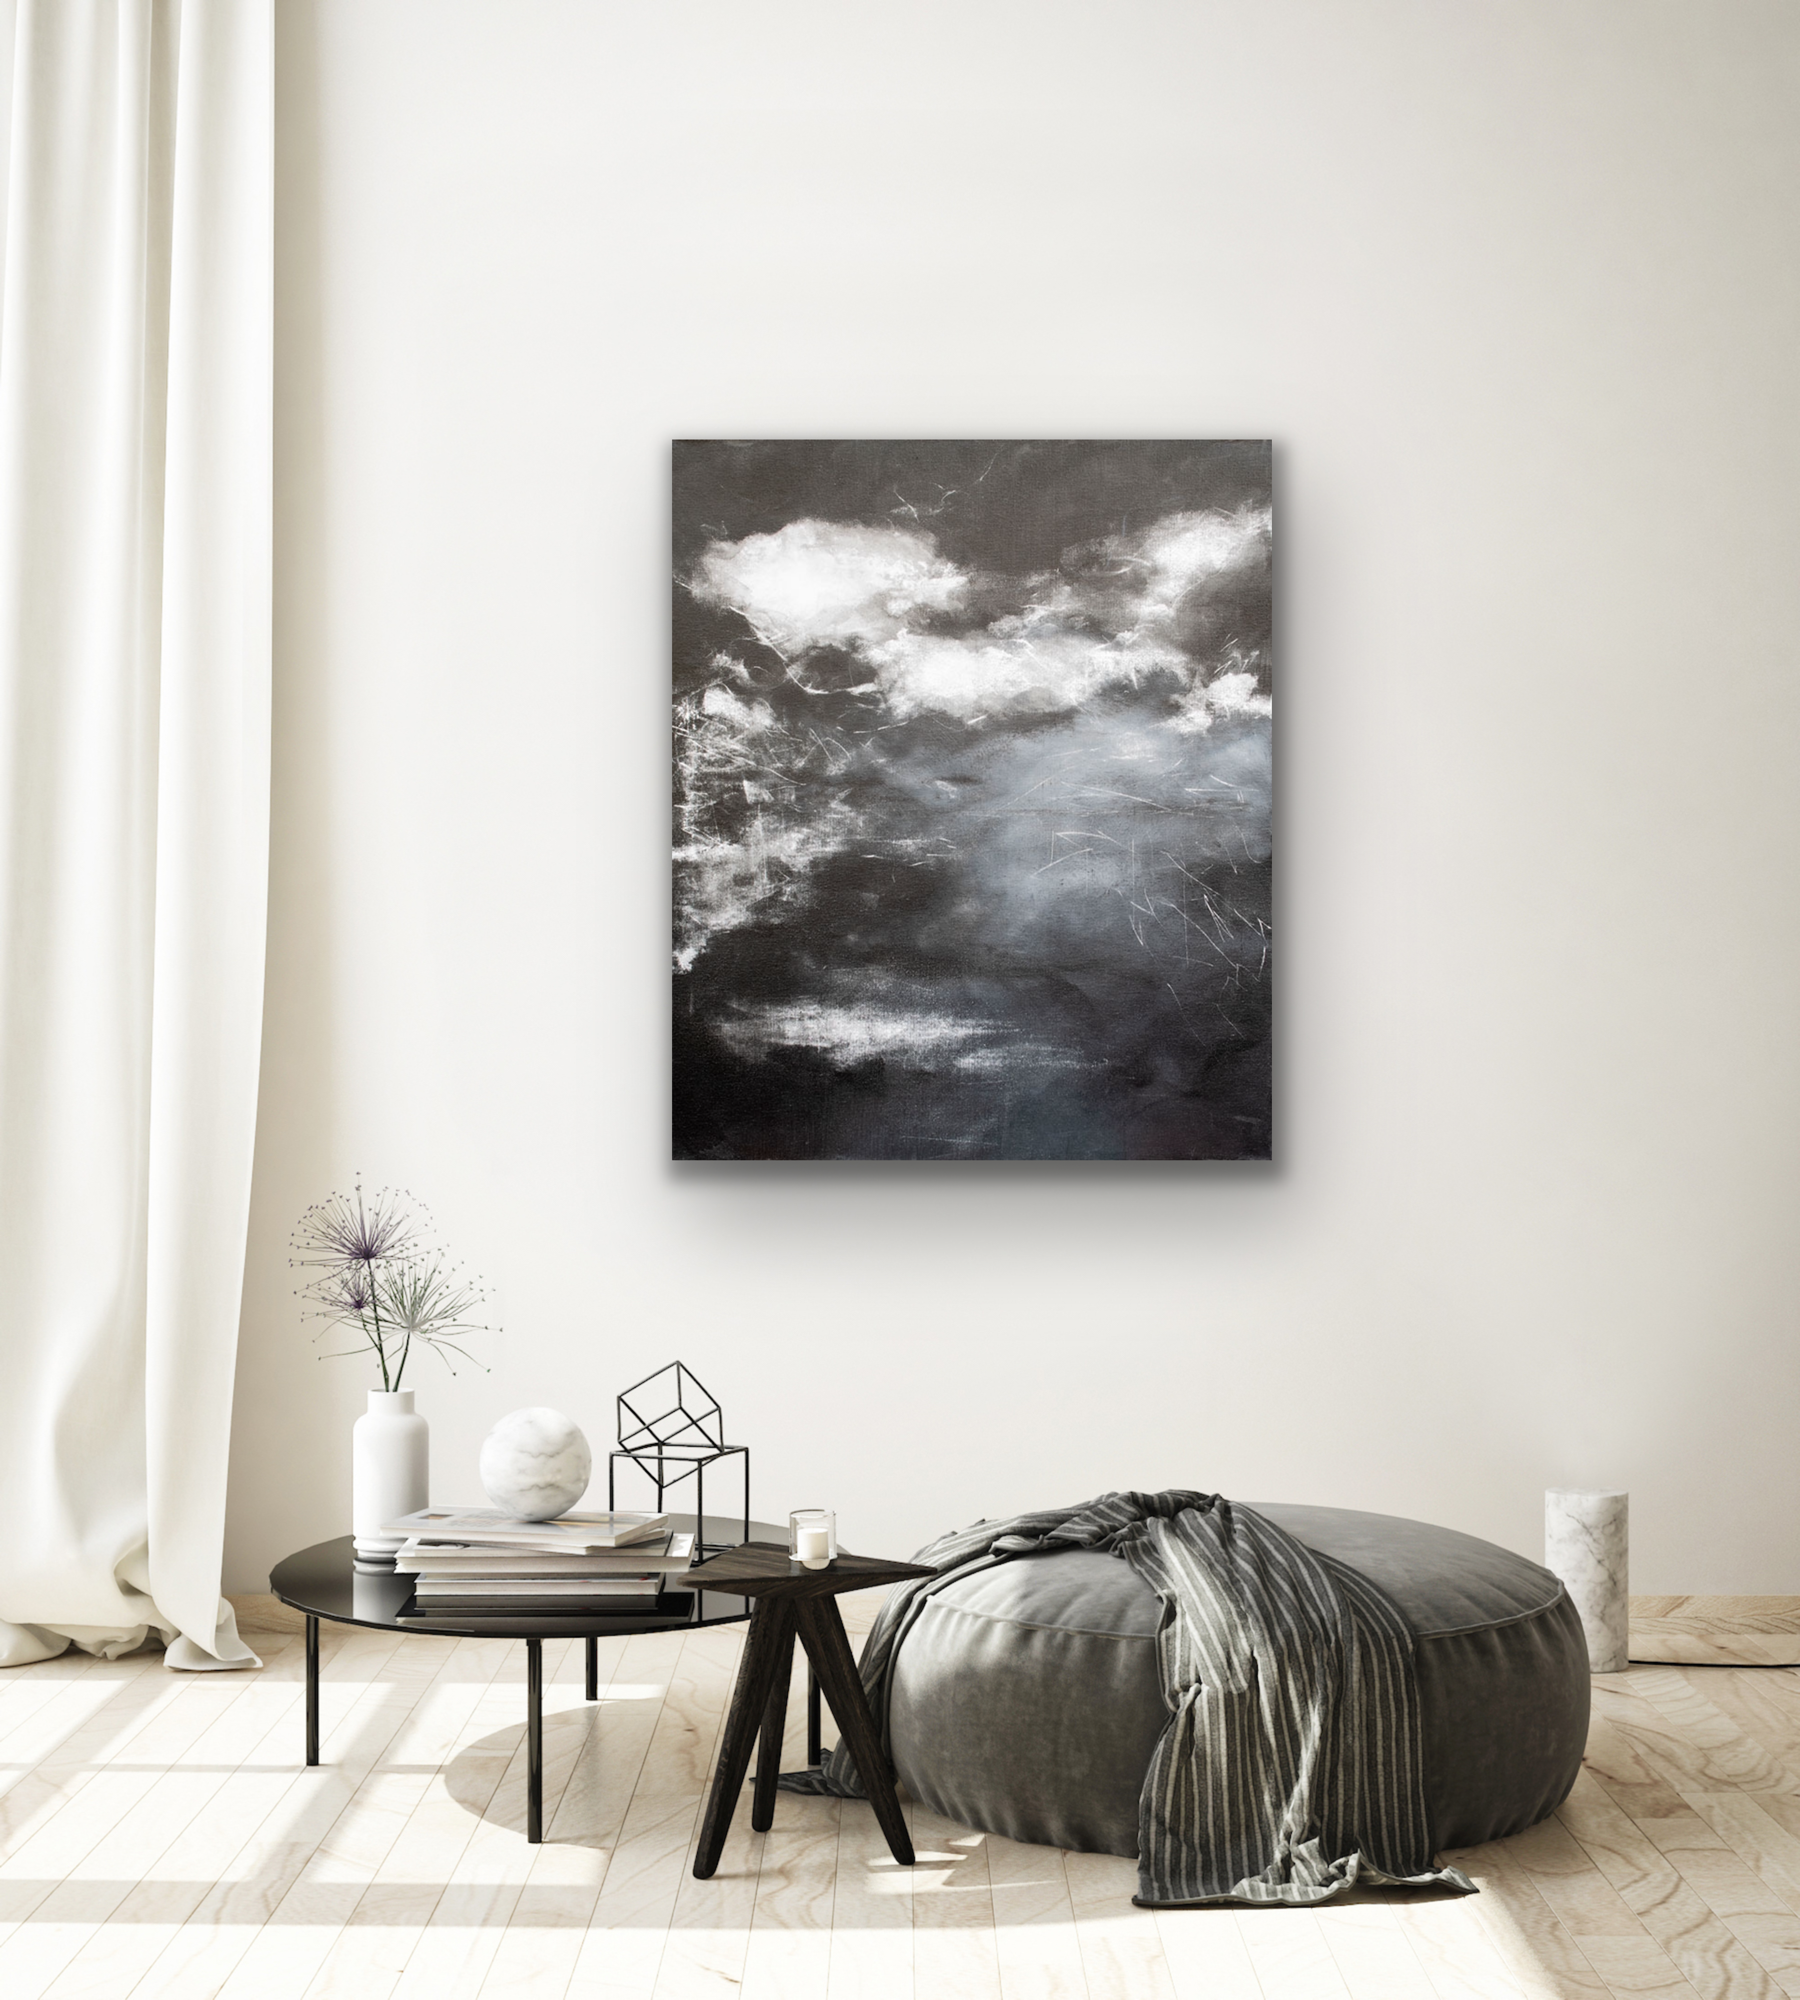 "Mono Cloud II" artwork with it black and white colours will match most room decors.